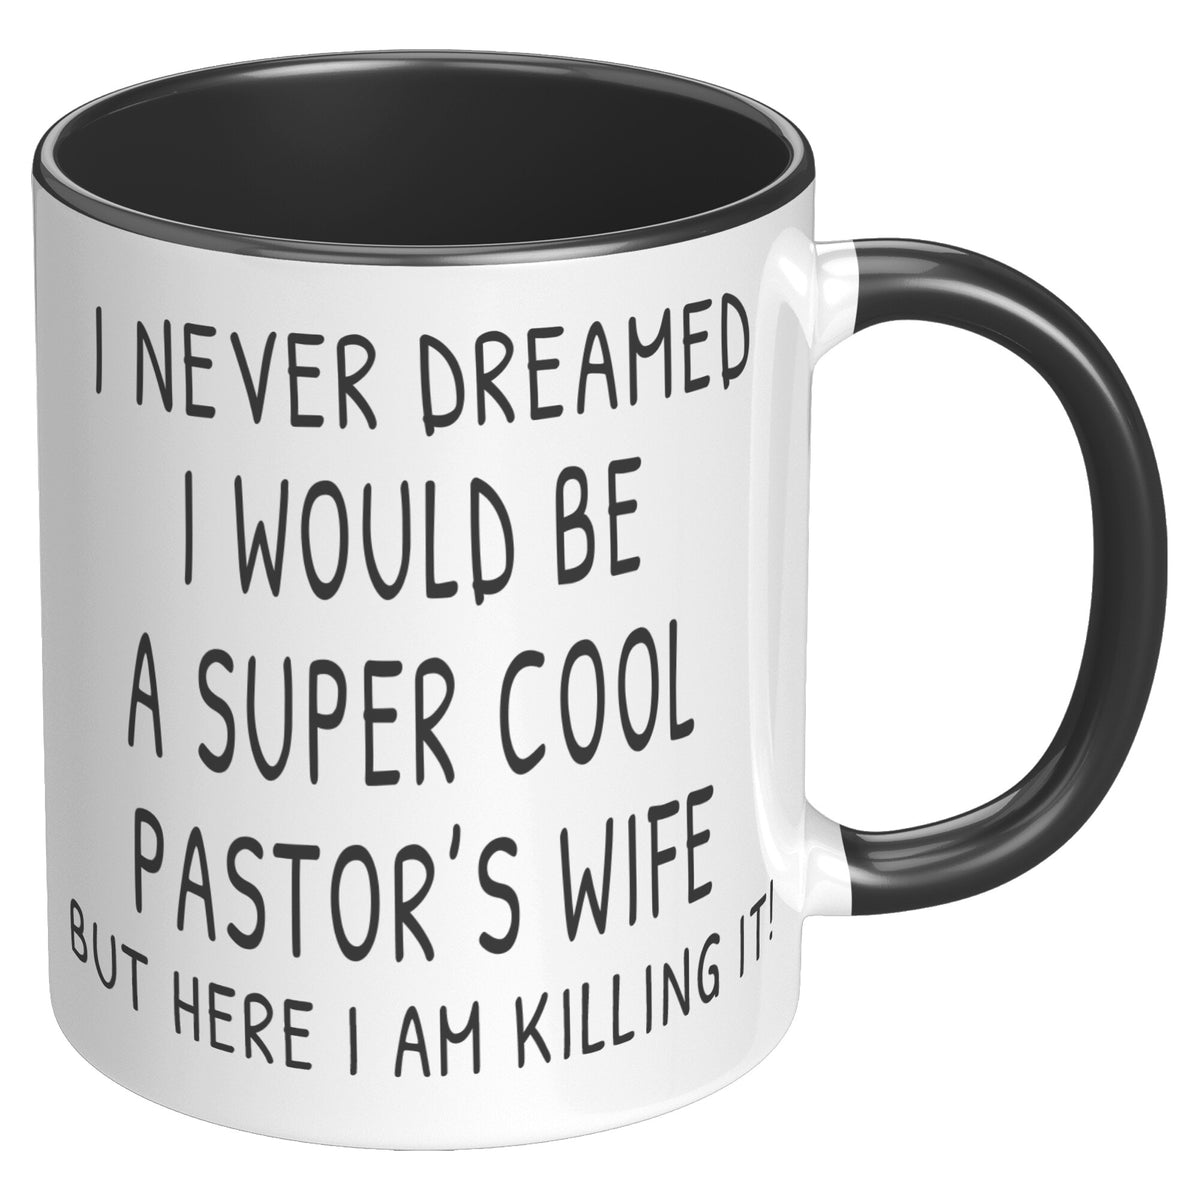 Pastor's Wife Gift - Never Dreamed Would Be A Super Cool Pastor's Wife Accent Coffee Mug 11oz